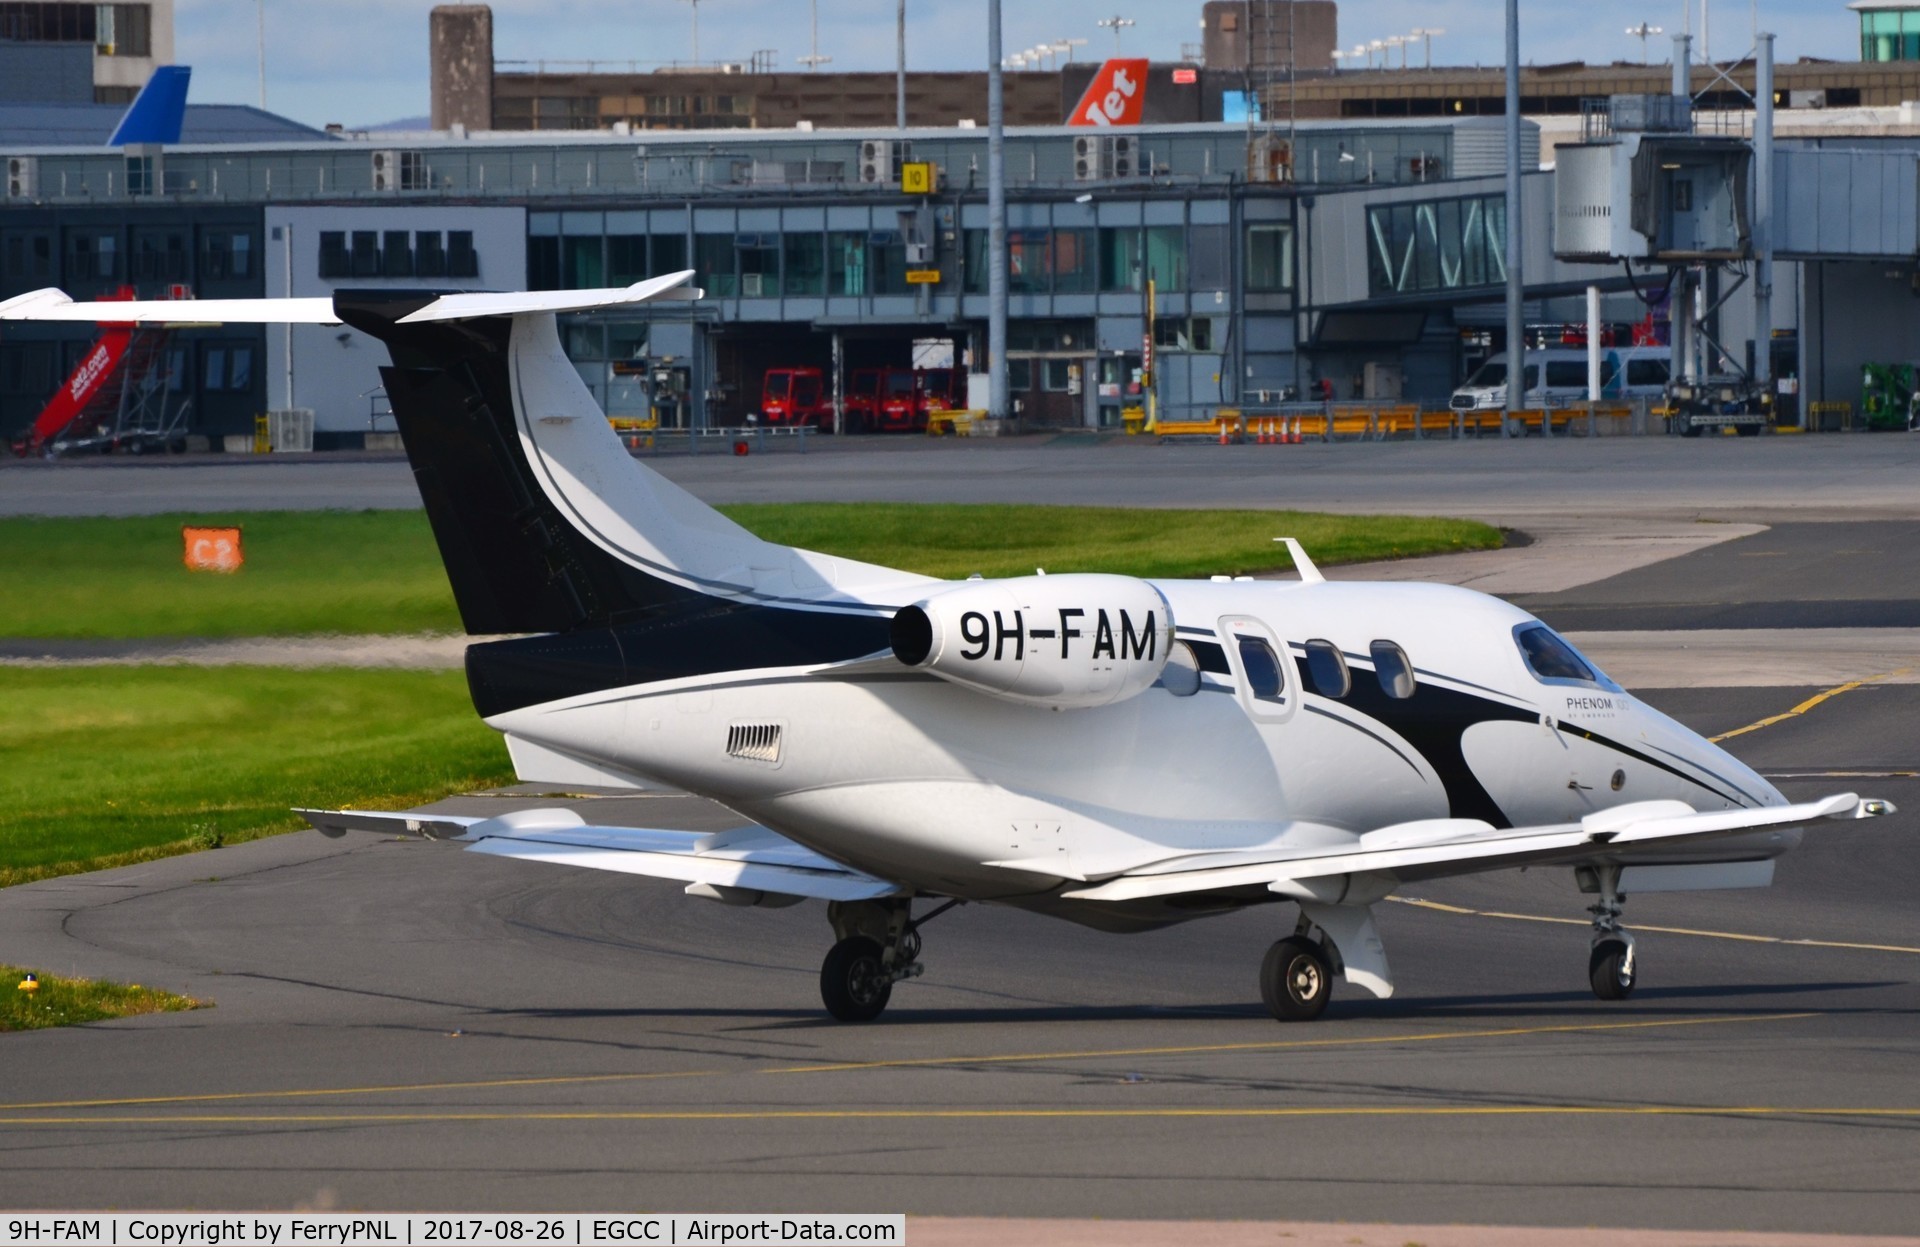 9H-FAM, 2009 Embraer EMB-500 Phenom 100 C/N 50000100, After a quick stop this EMB500 is ready to depart again.